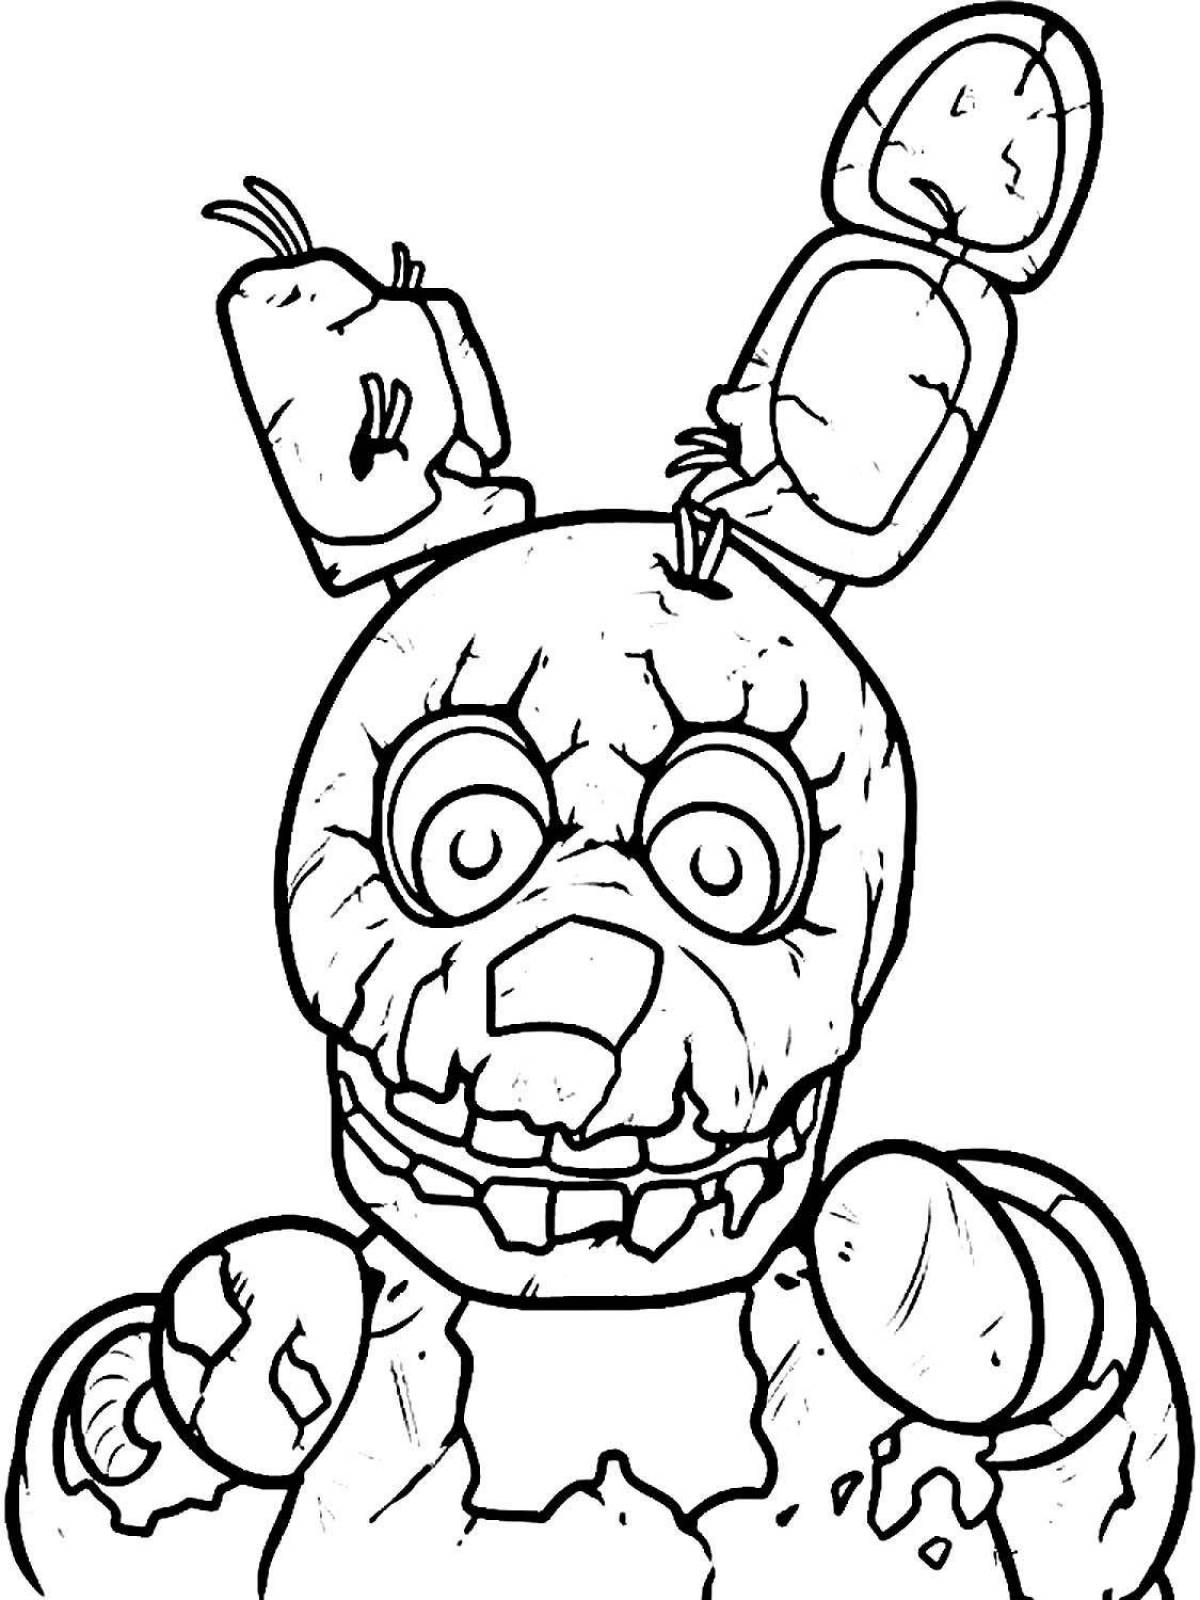 Awesome official fnaf coloring